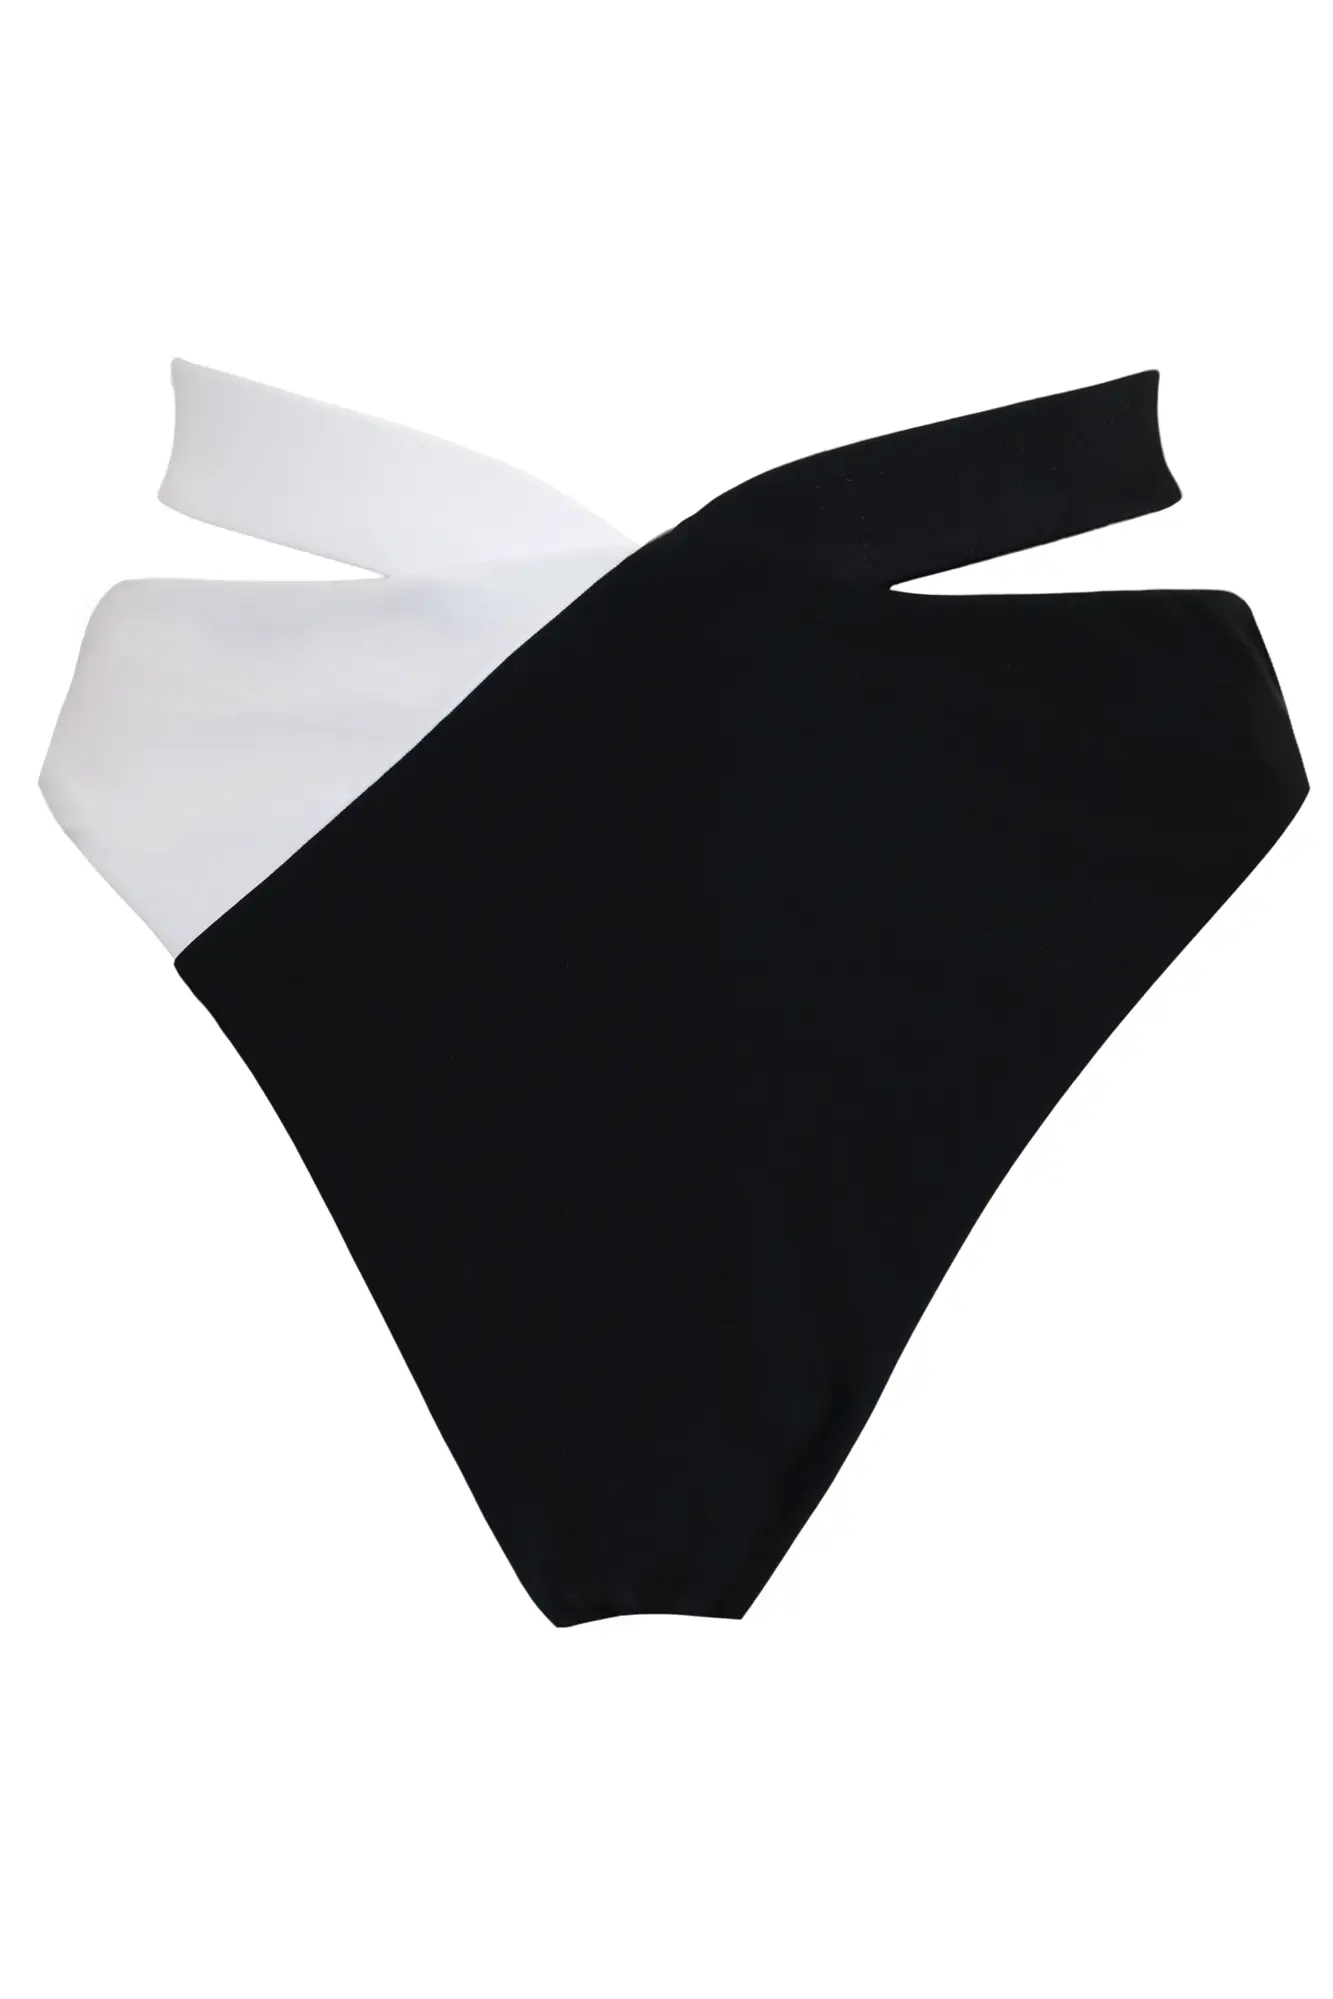 Freedom Cut Out V Brief | Black/White | Pour Moi